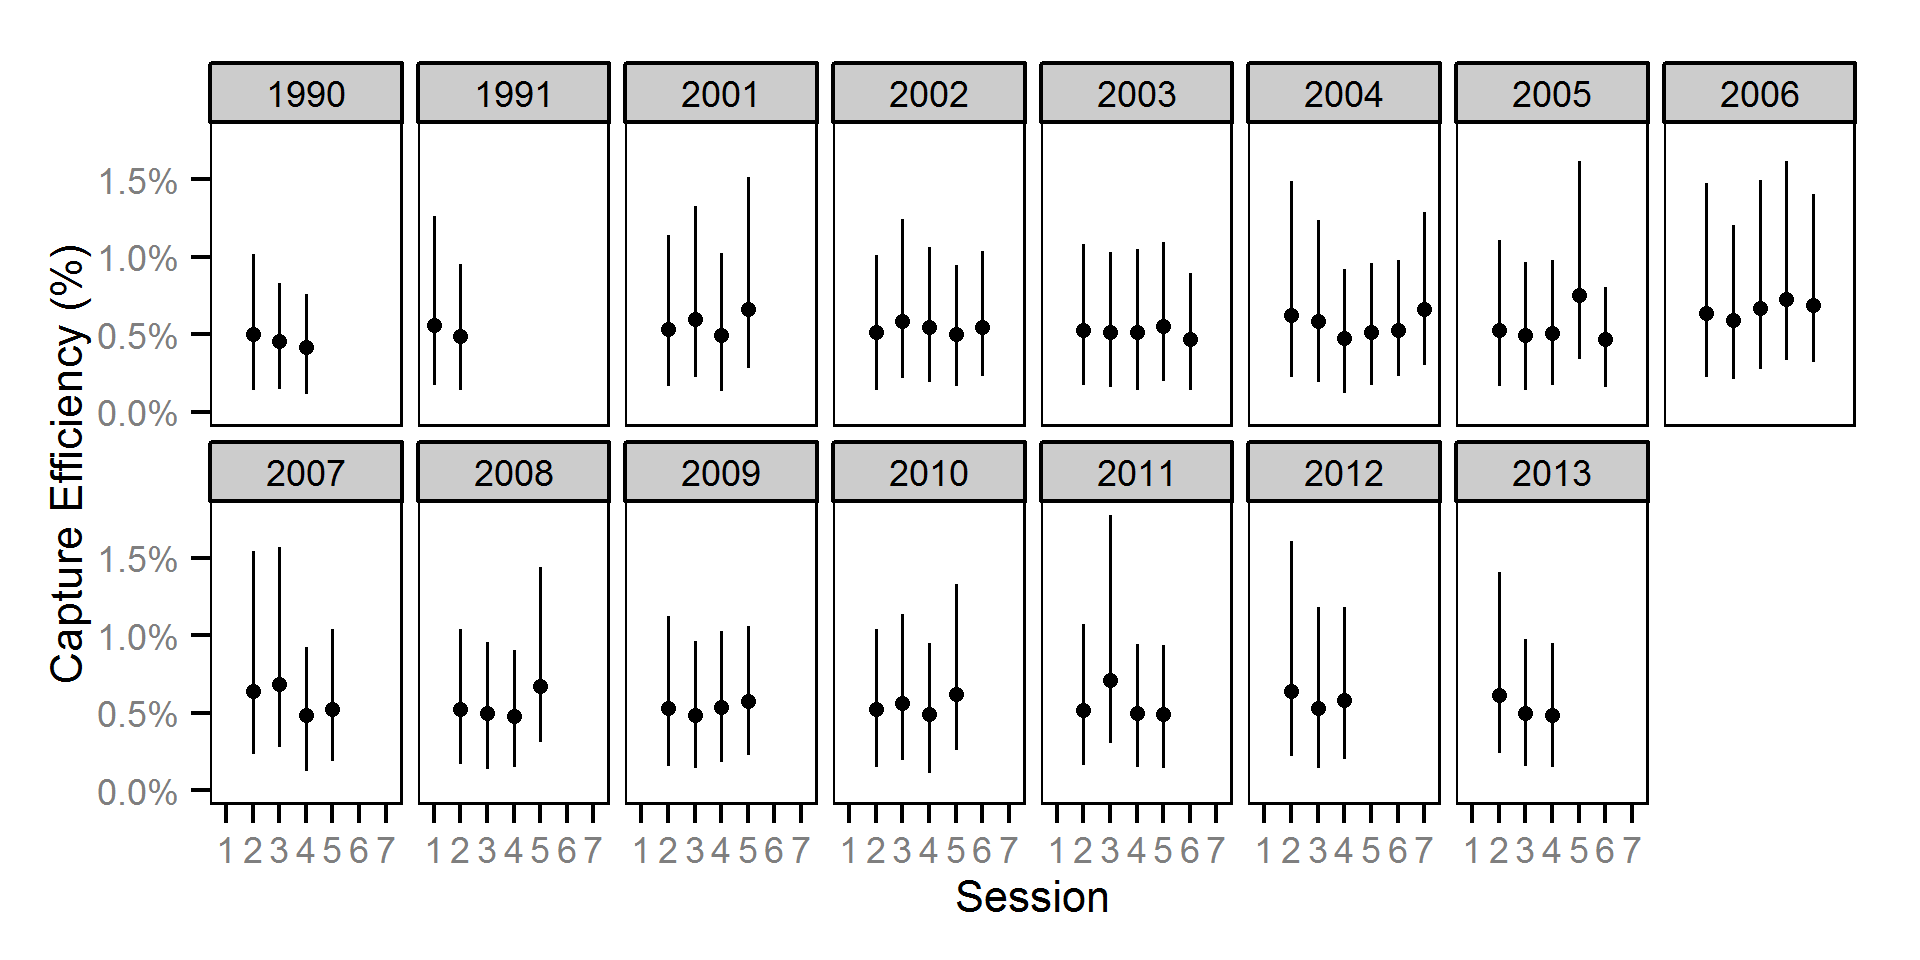 figures/efficiency/Adult MW/session-year.png